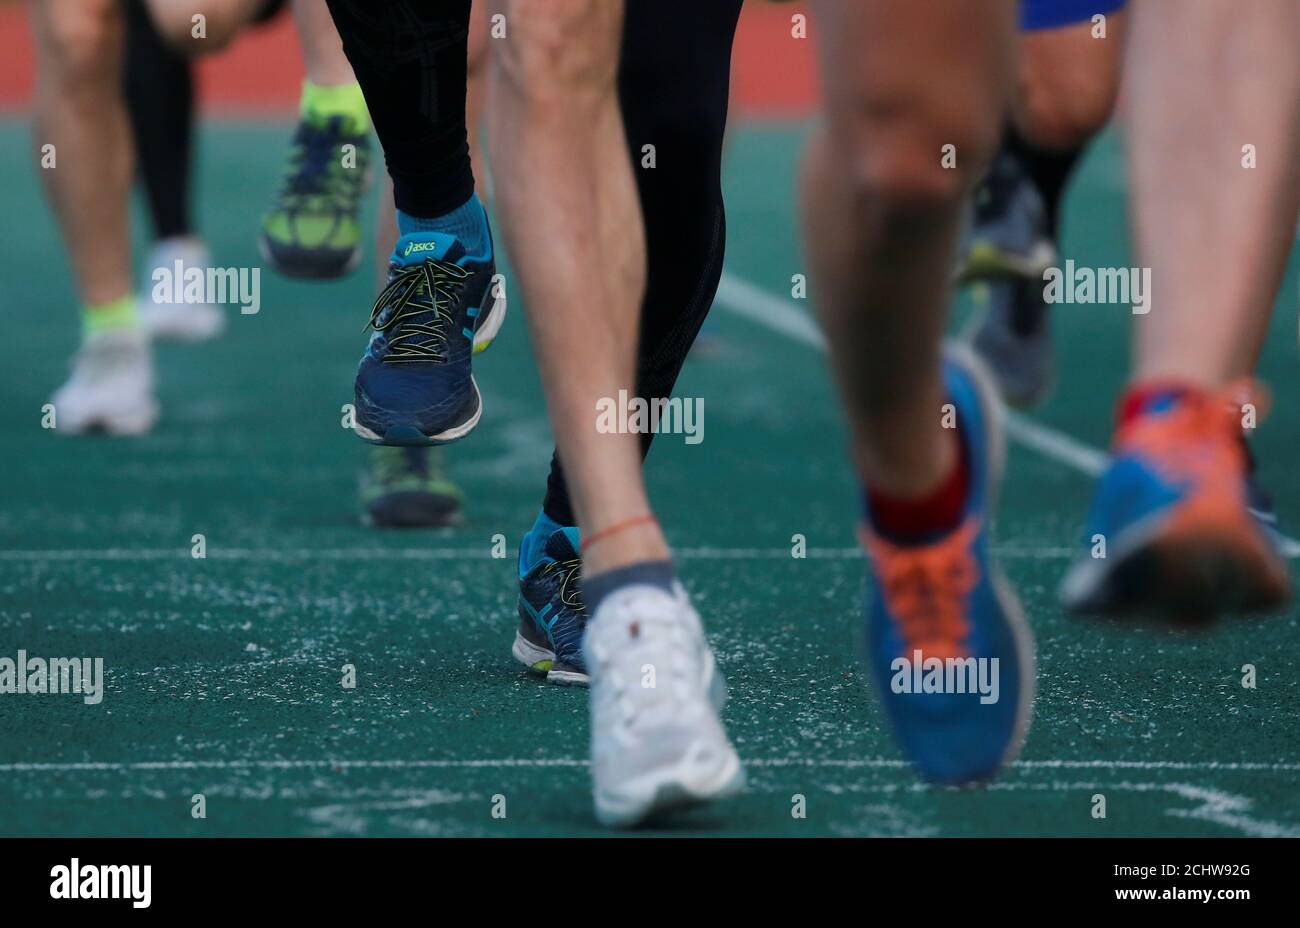 Asics Running High Resolution Stock Photography and Images - Alamy